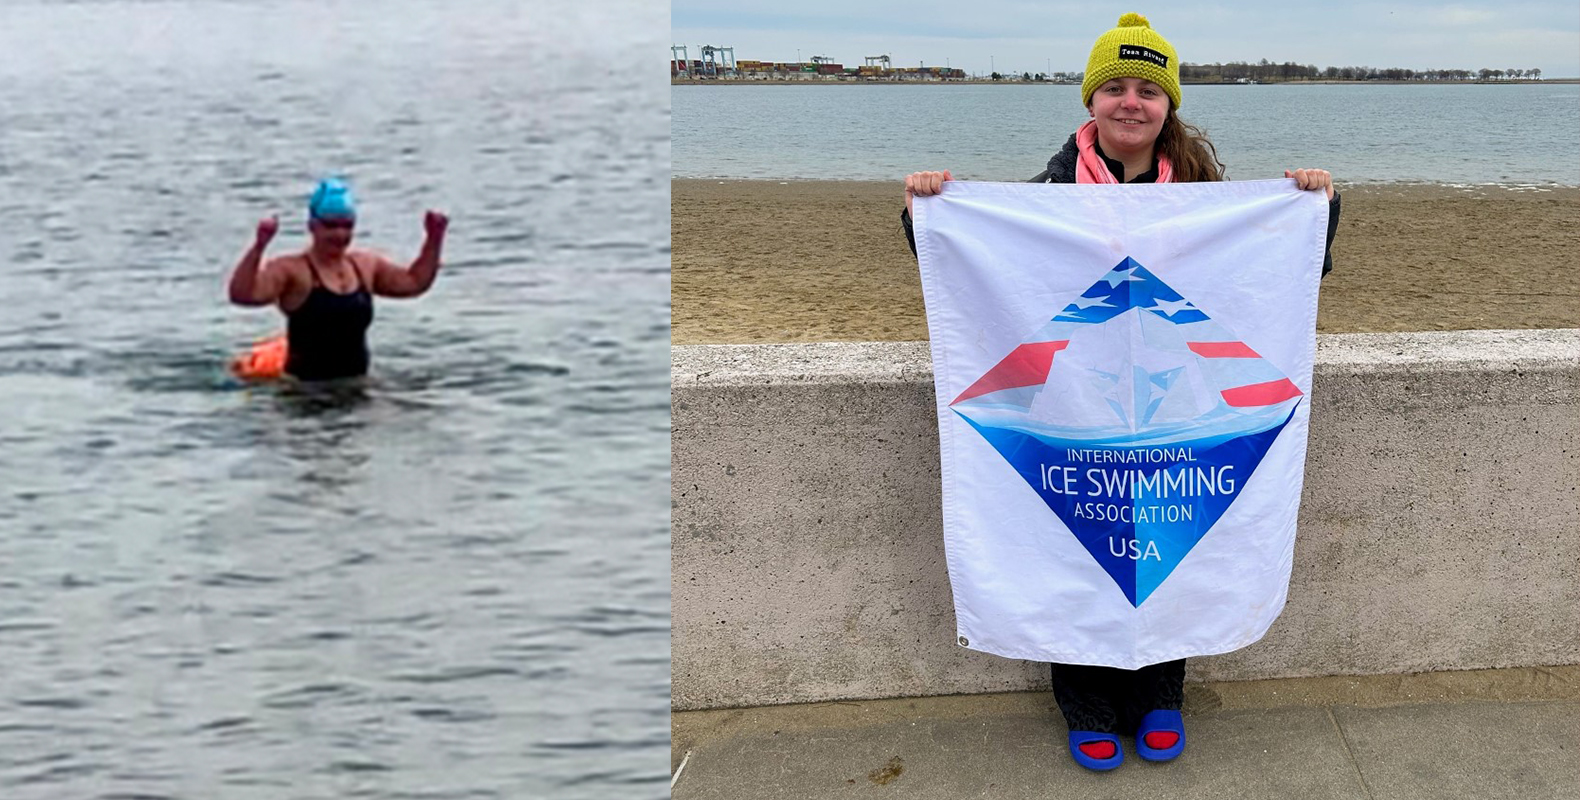 Vera Rivard Adds Another Achievement in Open Water Swimming